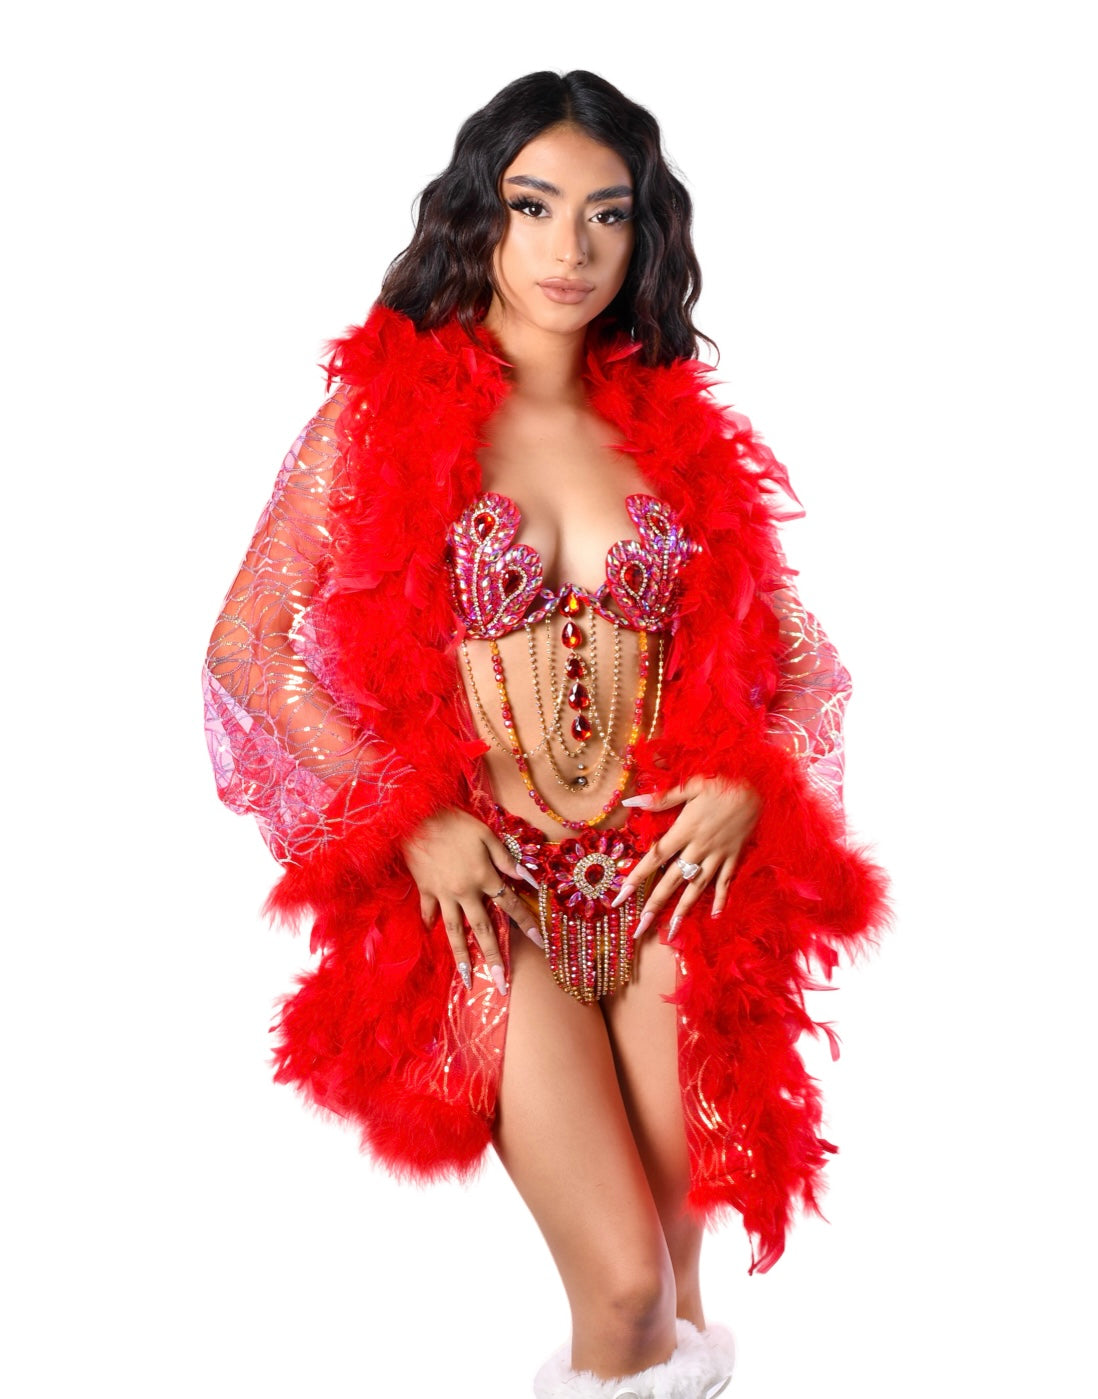 FULL OUTFIT- Empress Showgirl